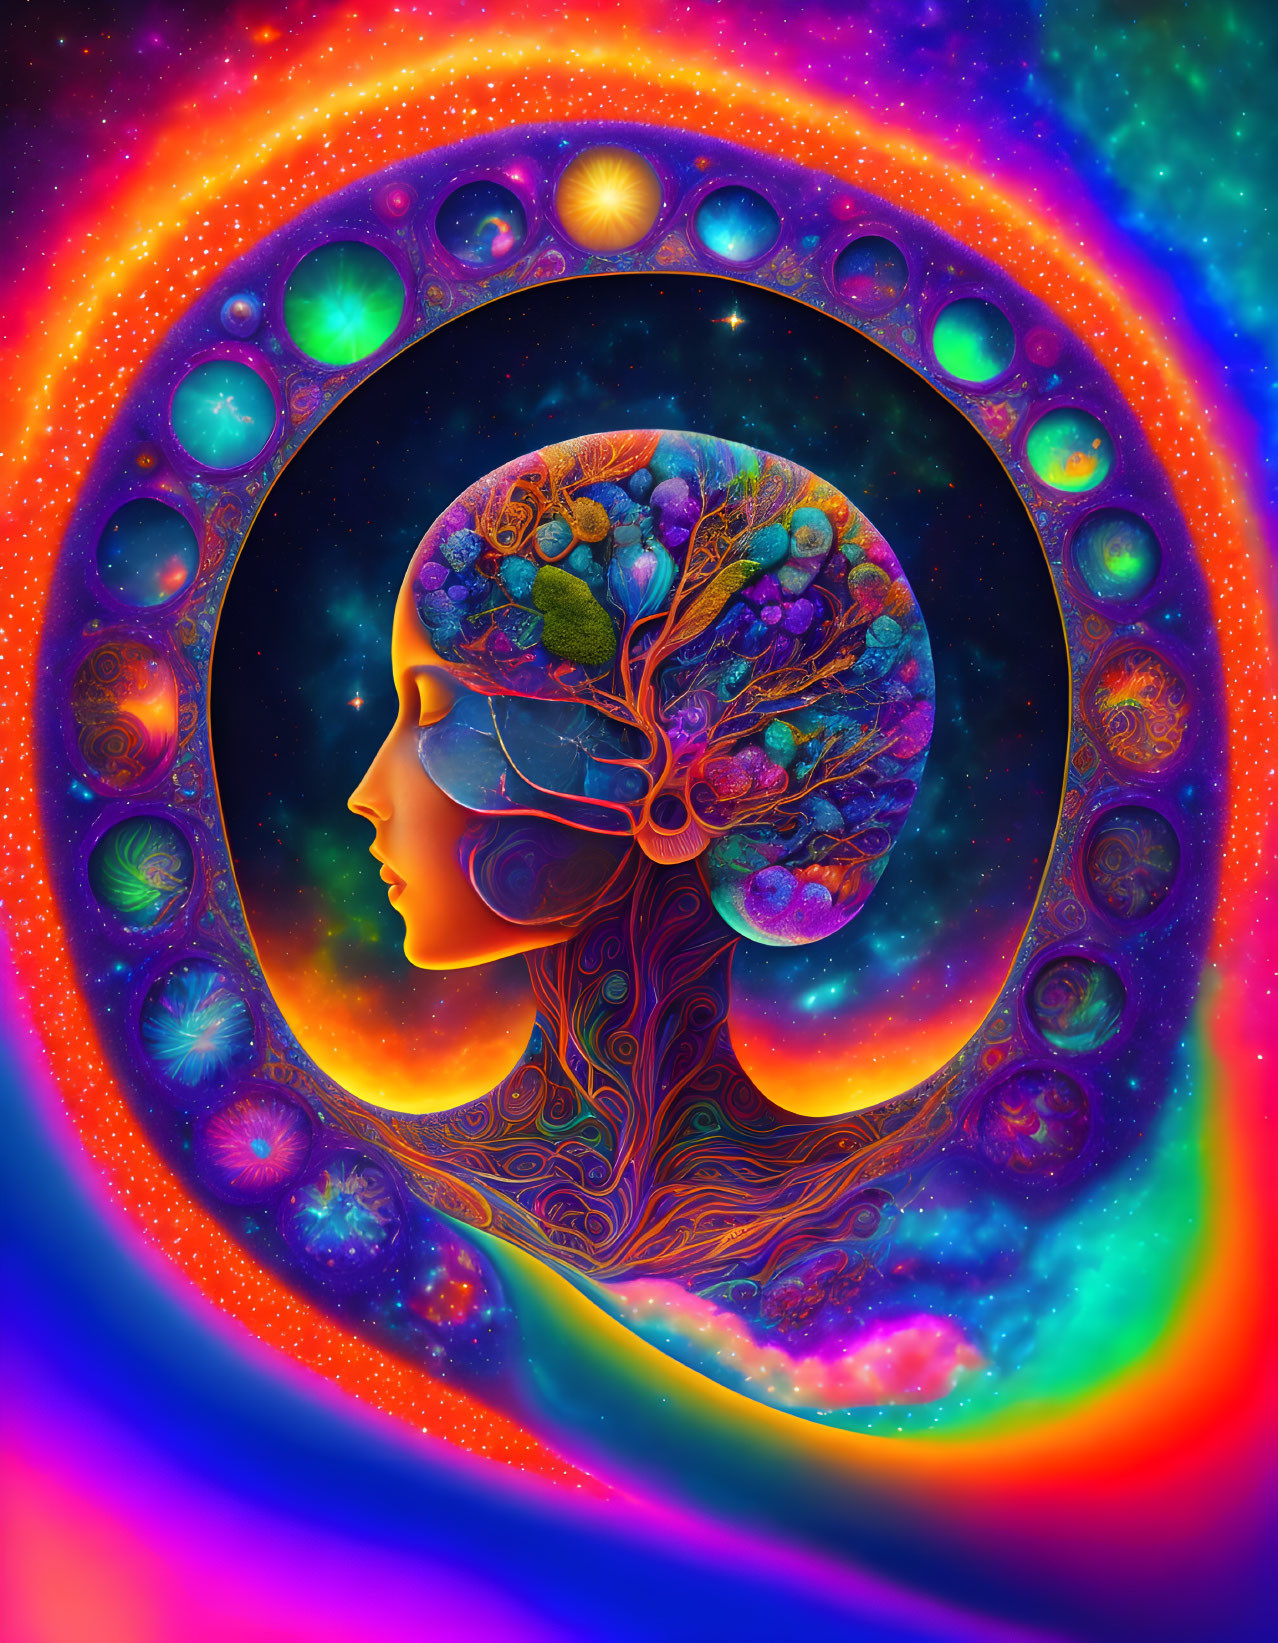 Colorful Human Profile with Tree Brain in Cosmic Background